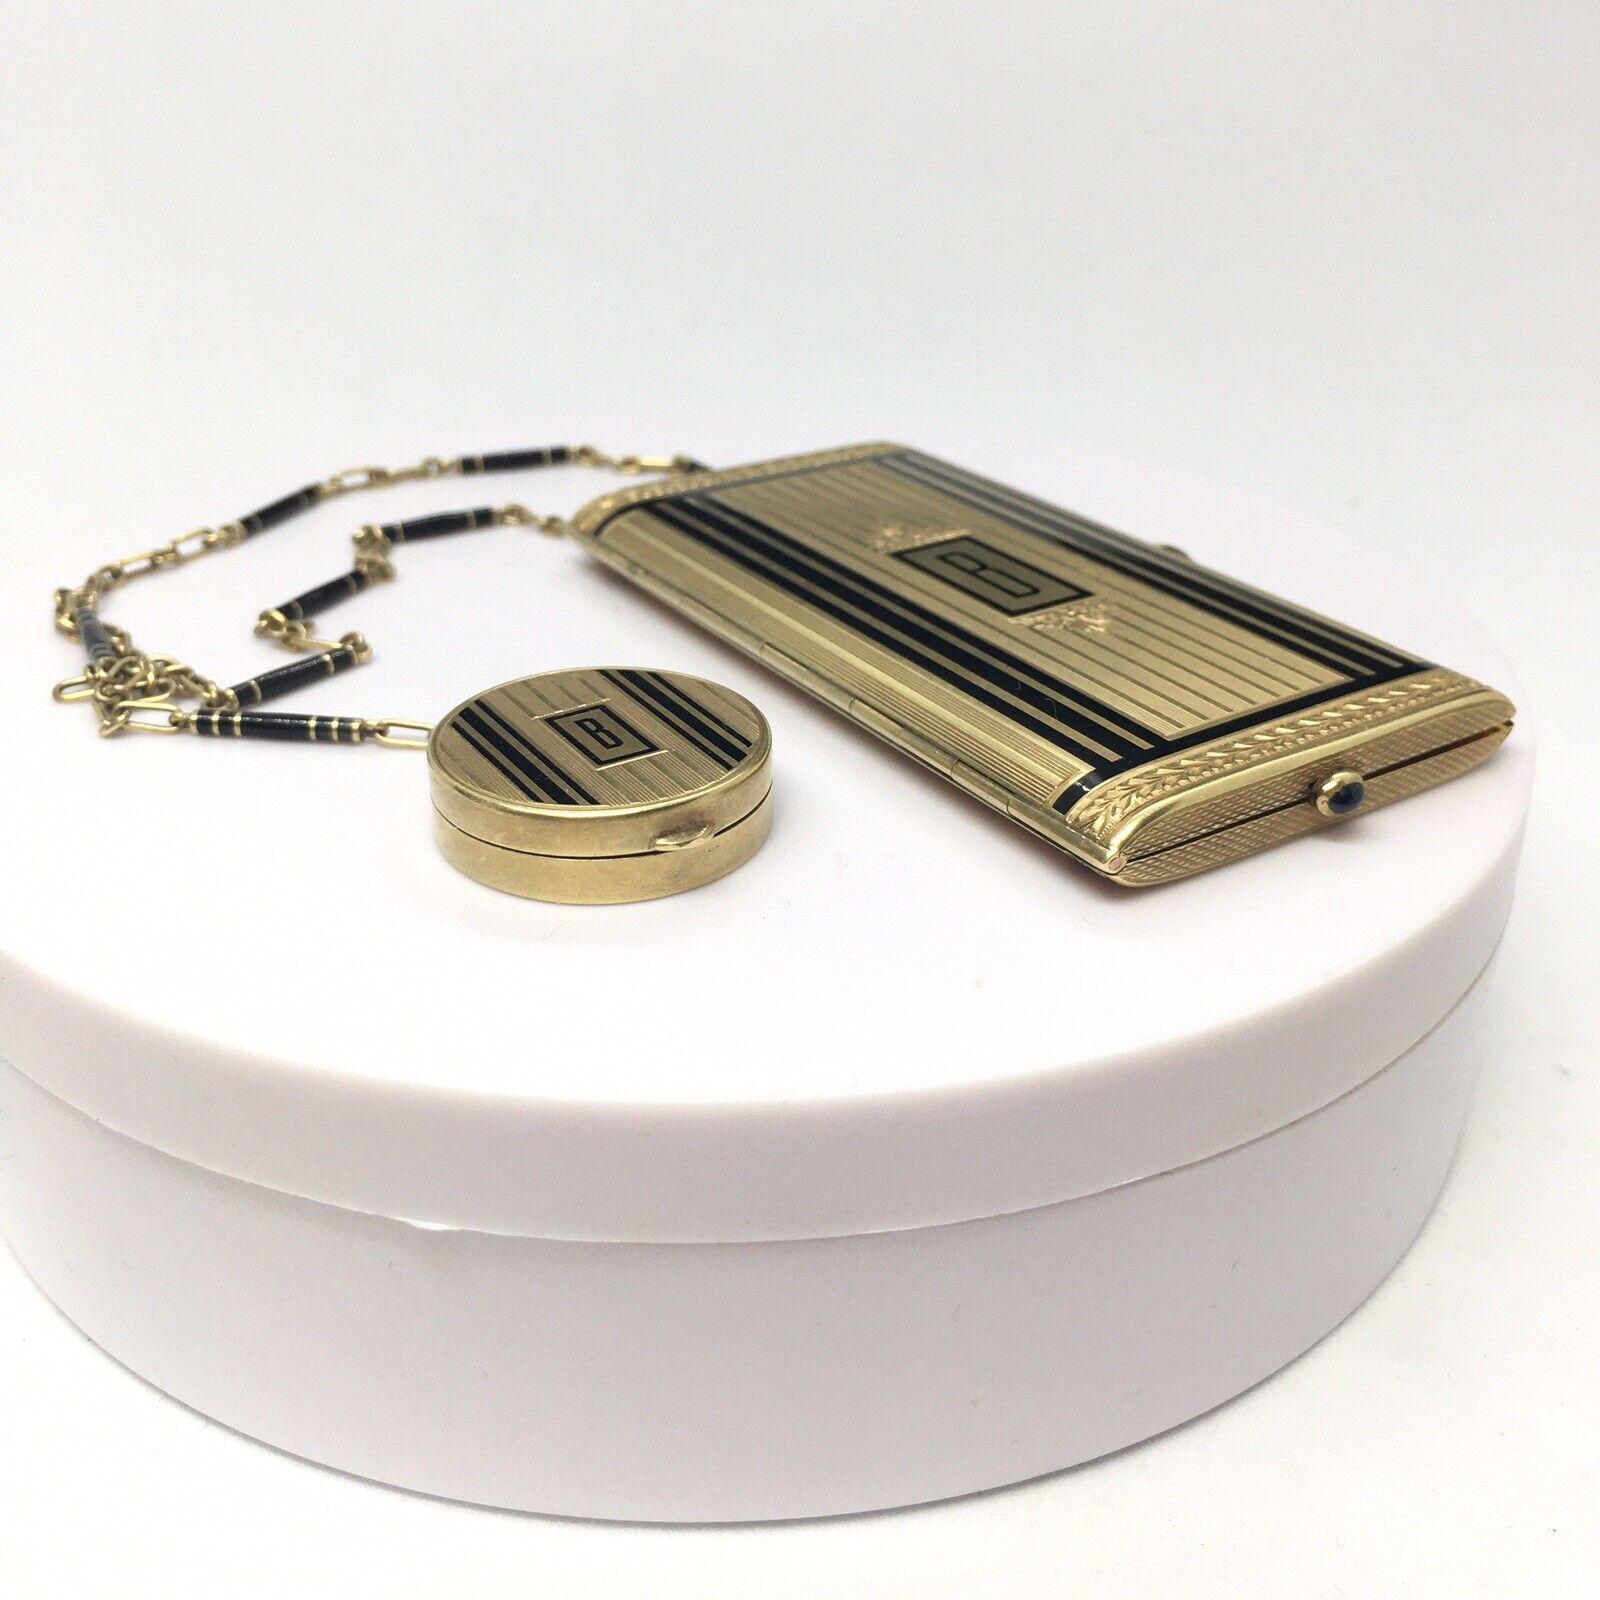 Art Deco 14K GOLD Makeup Case Compact Powder Rouge 1930s American made 99.2 Gr In Good Condition For Sale In Santa Monica, CA